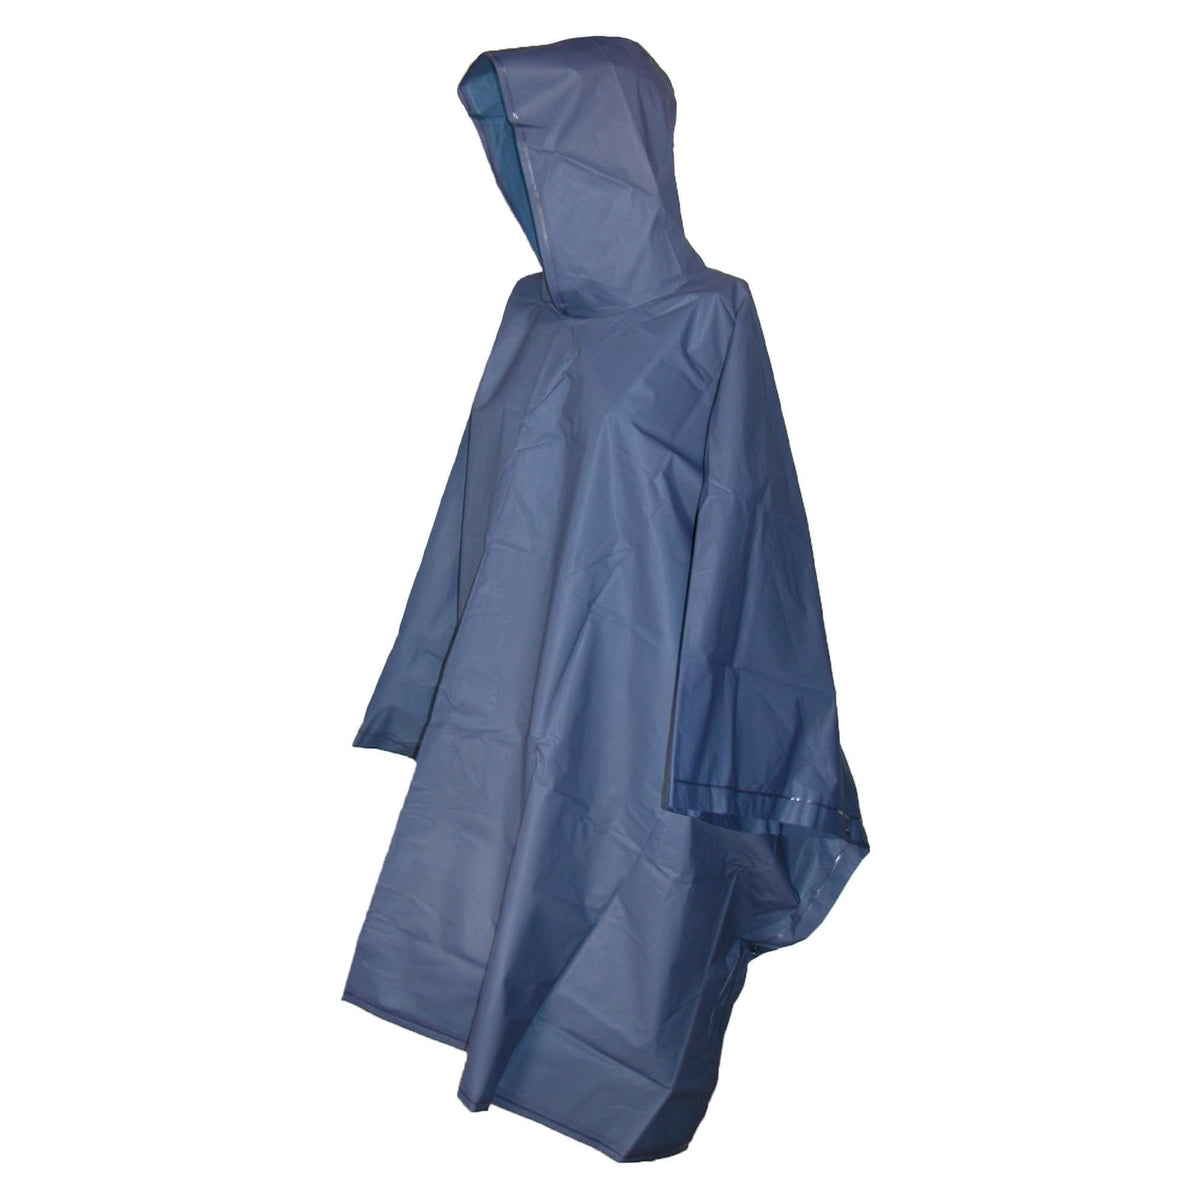 Adult's Hooded Pullover Rain Poncho with Side Snaps by Totes | Ponchos ...